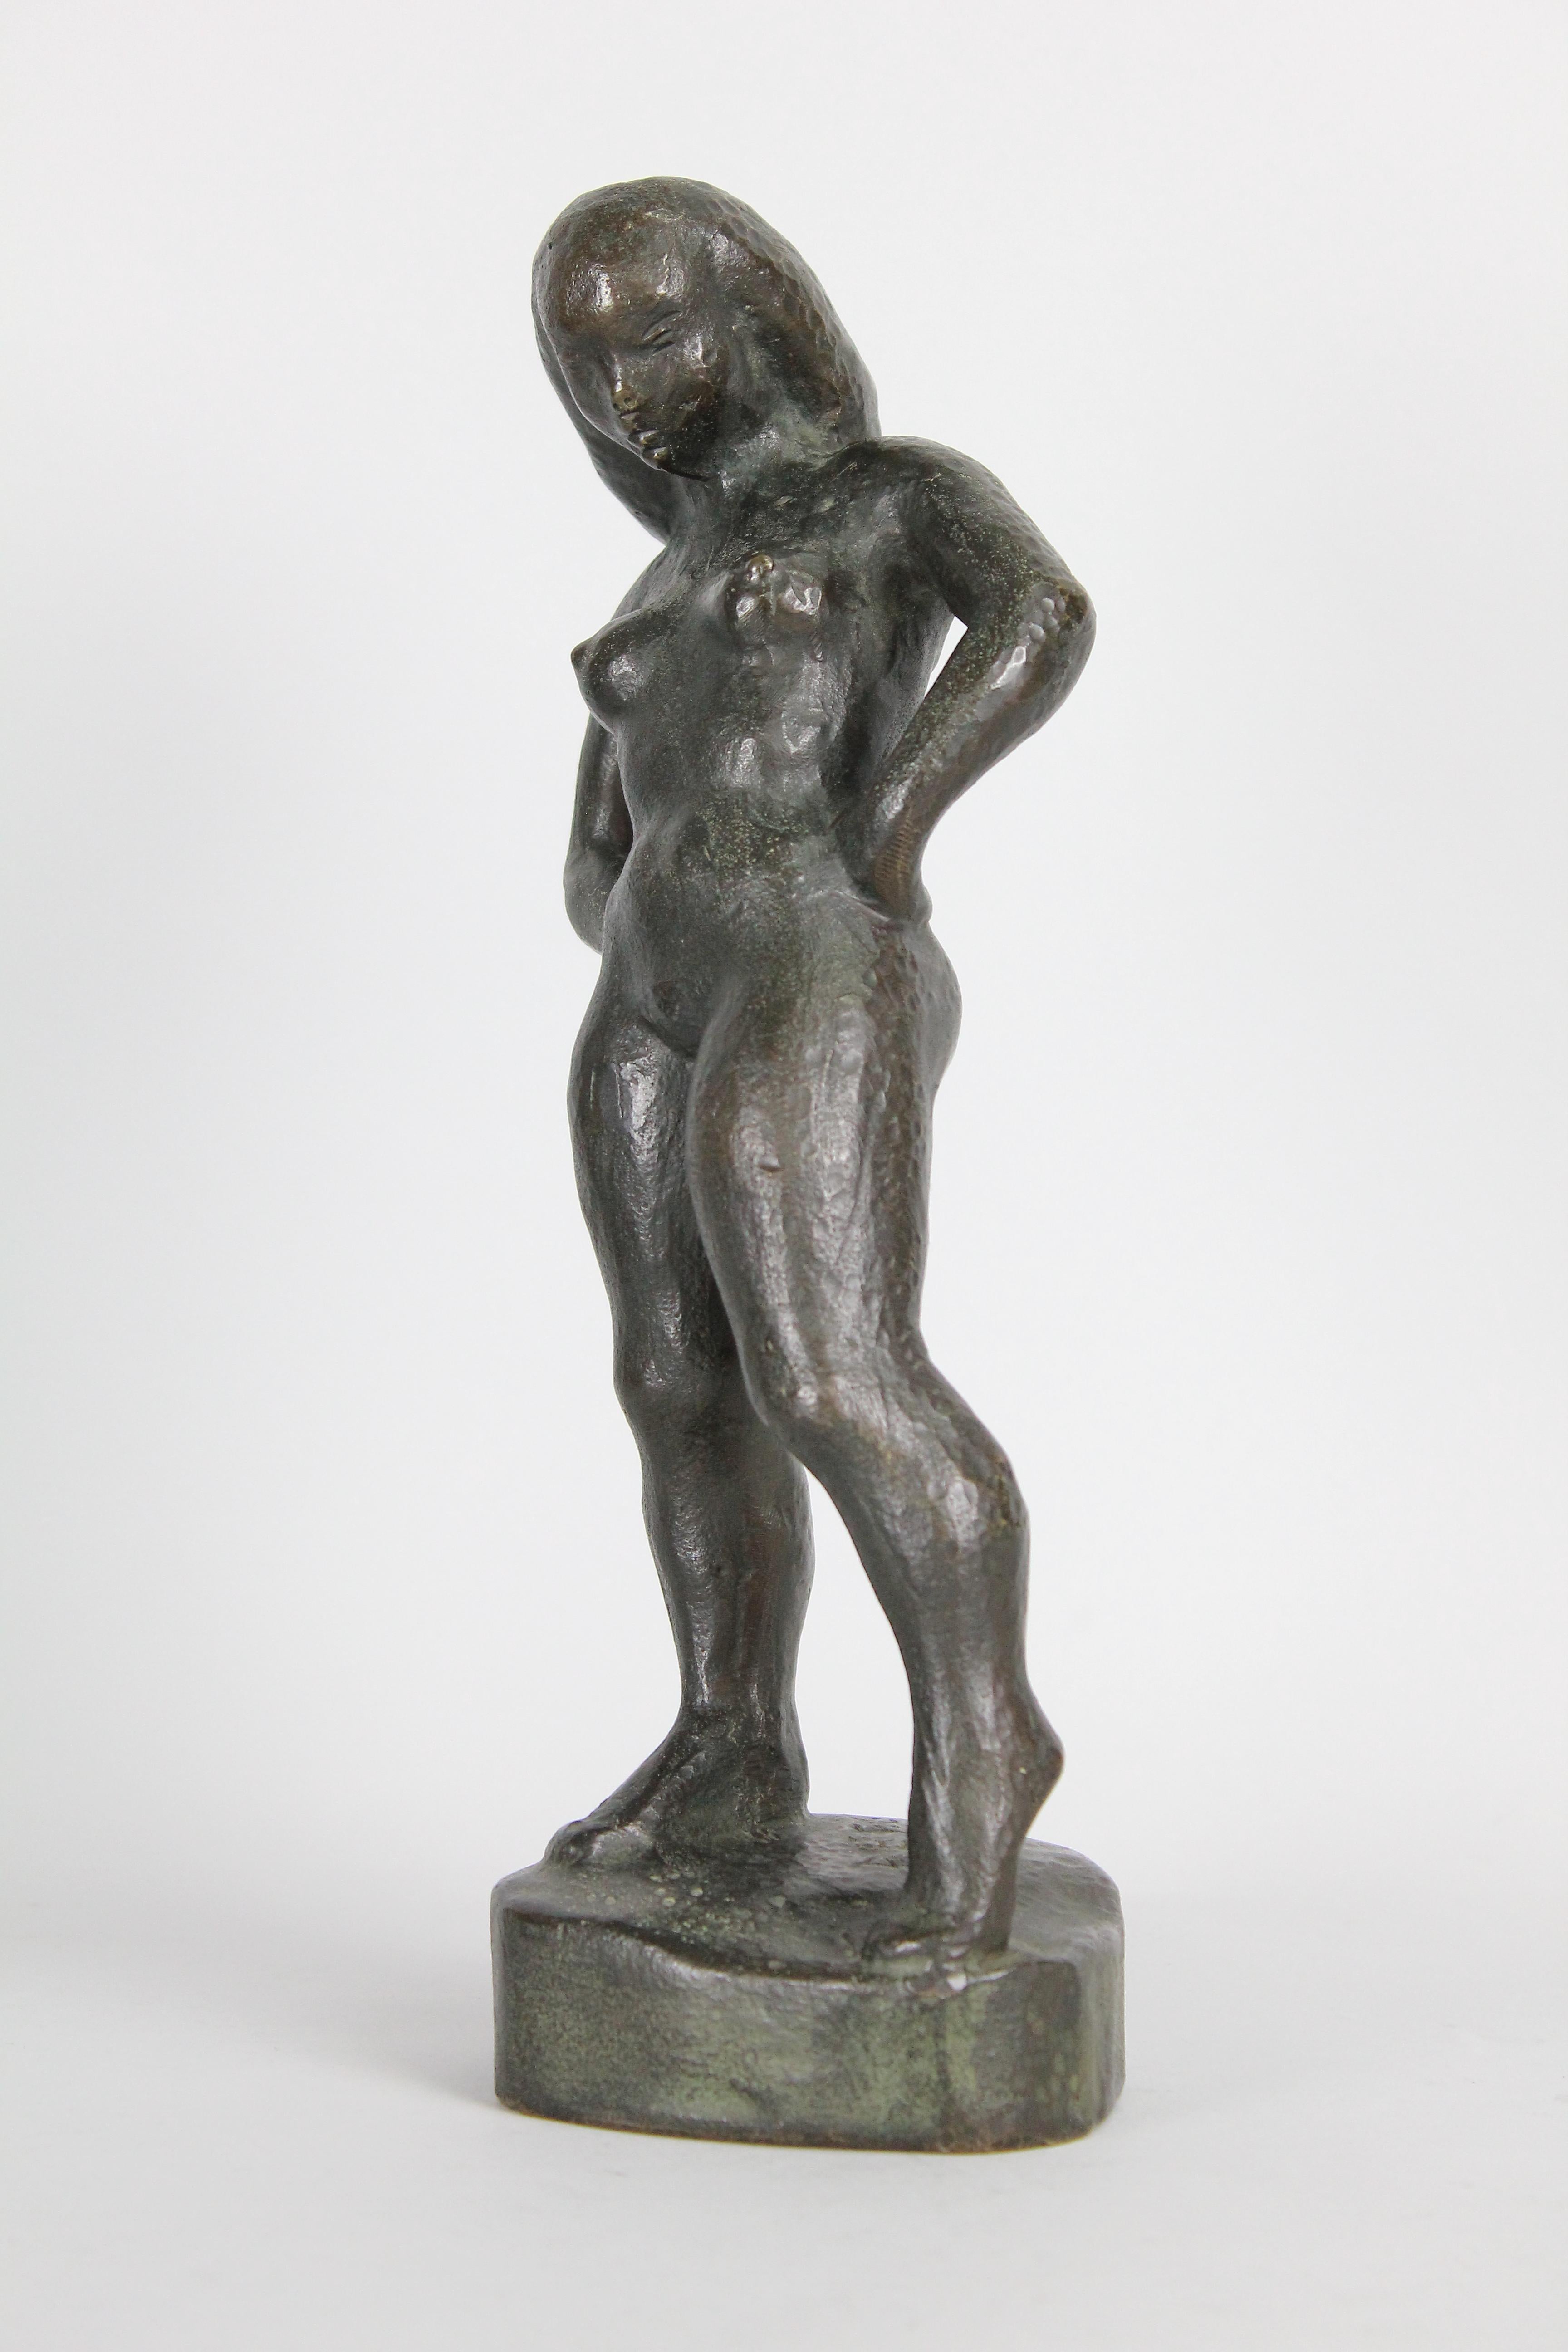 A young woman with an attitude! That pose says it all!

Cast in bronze and patinated in dark green/brown. Signed 